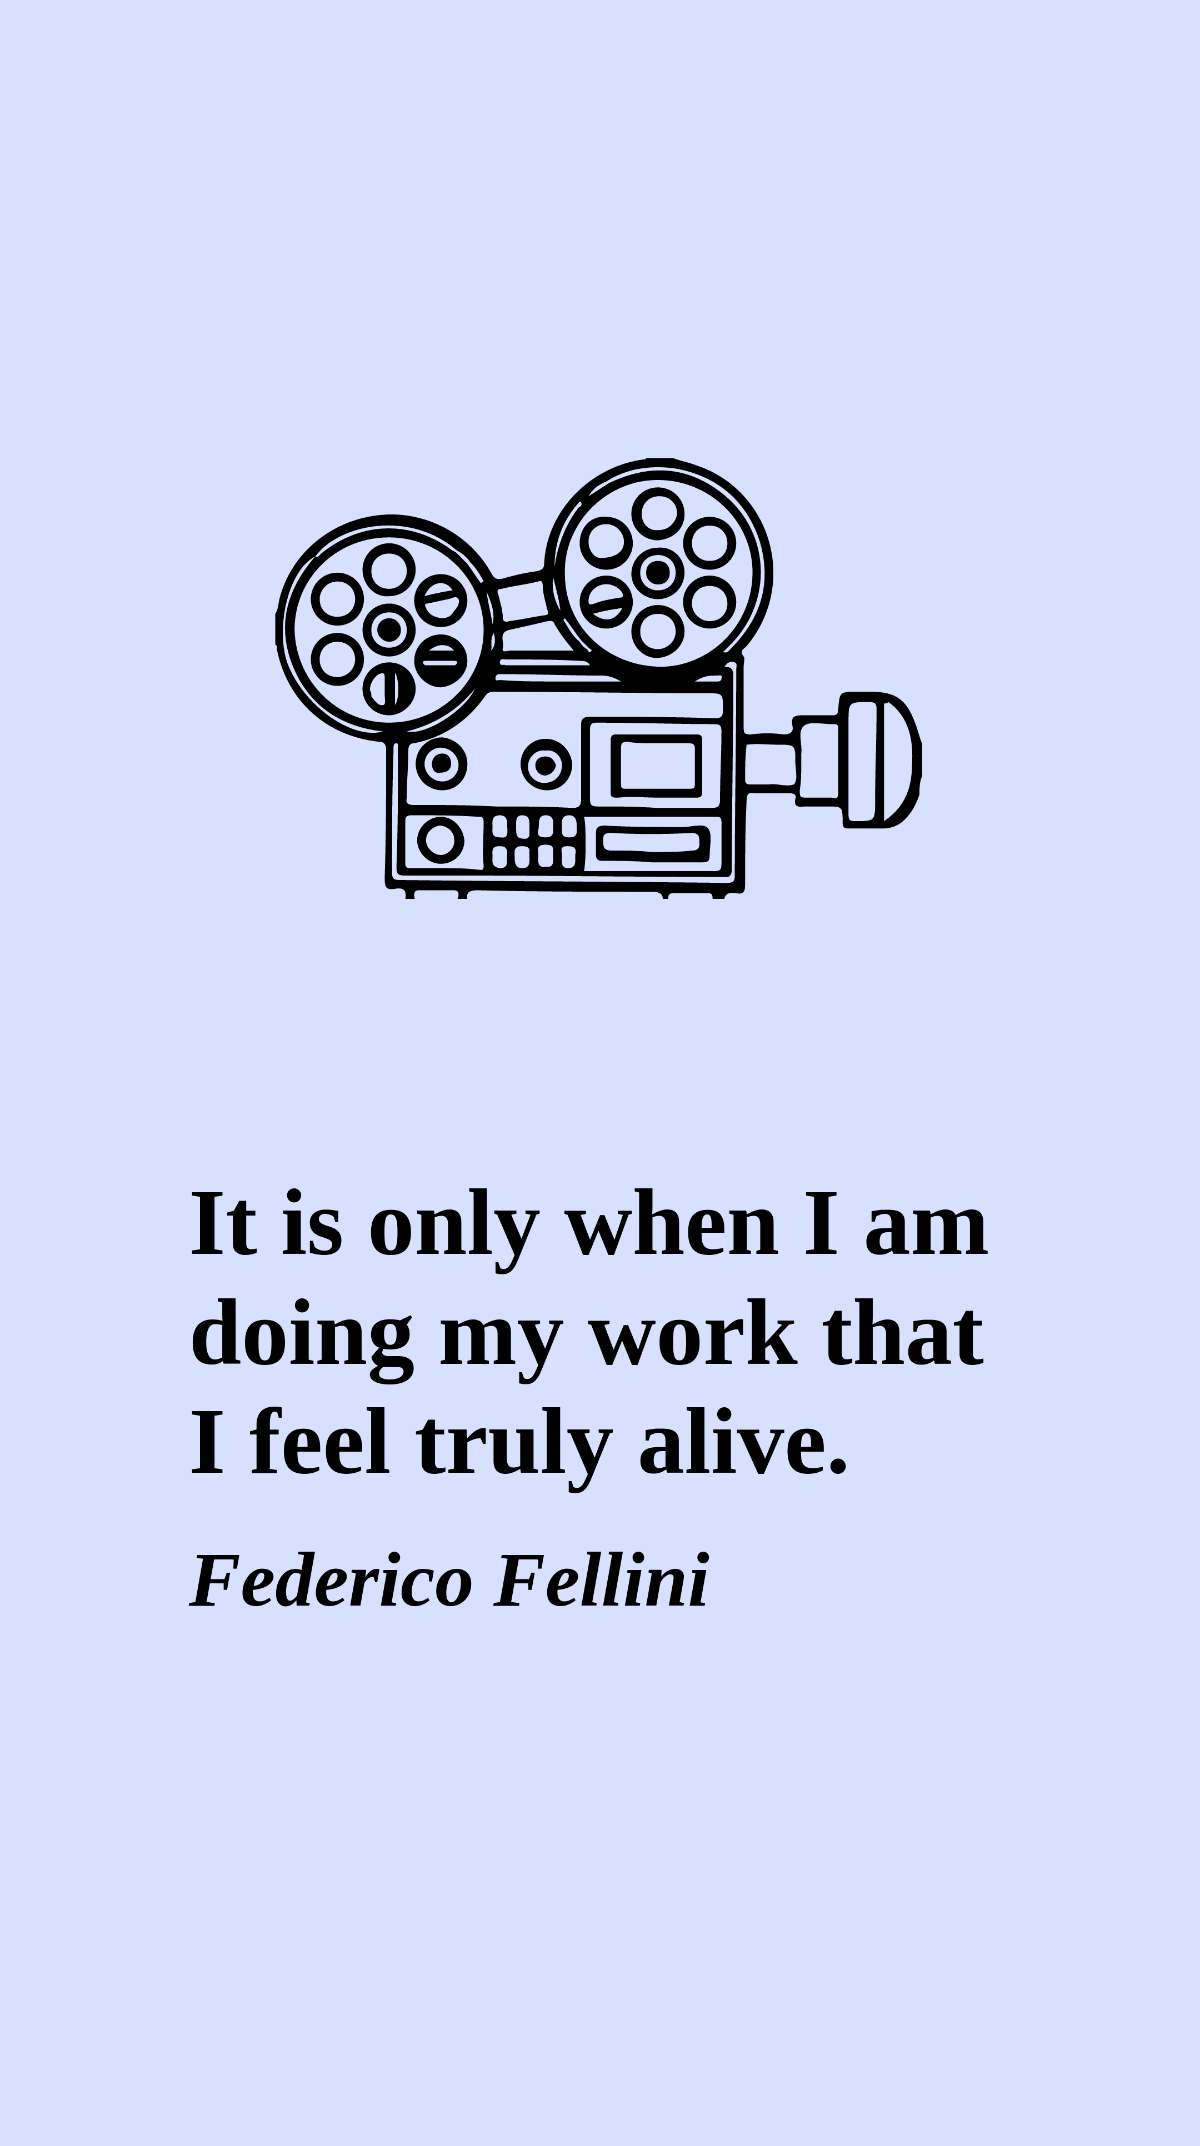 Federico Fellini - It is only when I am doing my work that I feel truly alive.